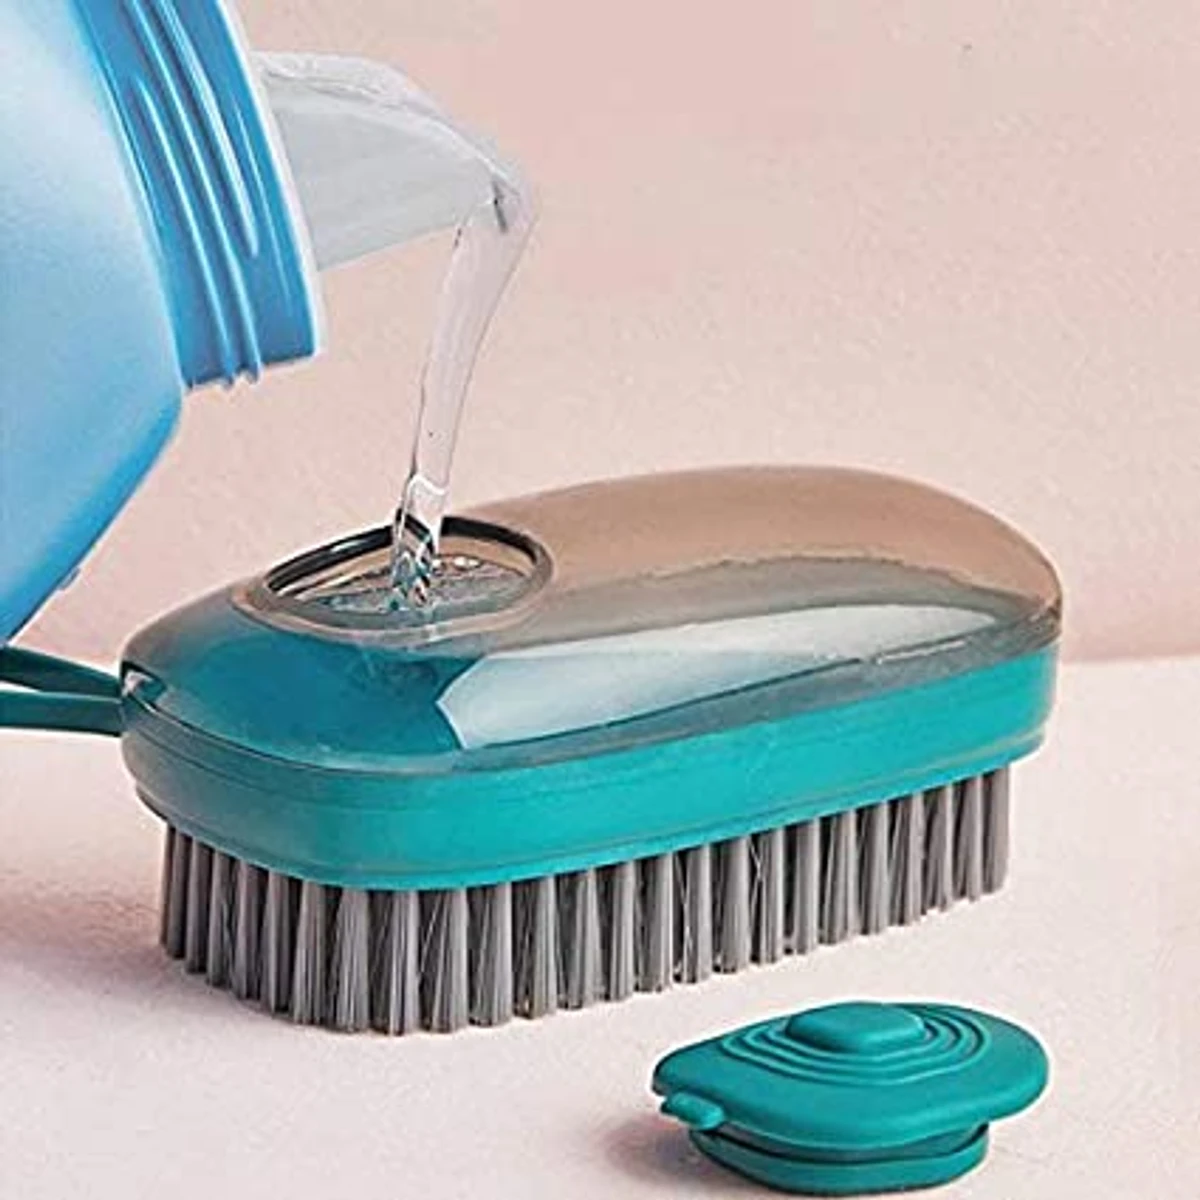 Toriox Household Automatic Liquid Adding Laundry Brush Convenient Hydraulic Plastic 3 in 1 Cleaning Brush for Kitchen and Bathroom